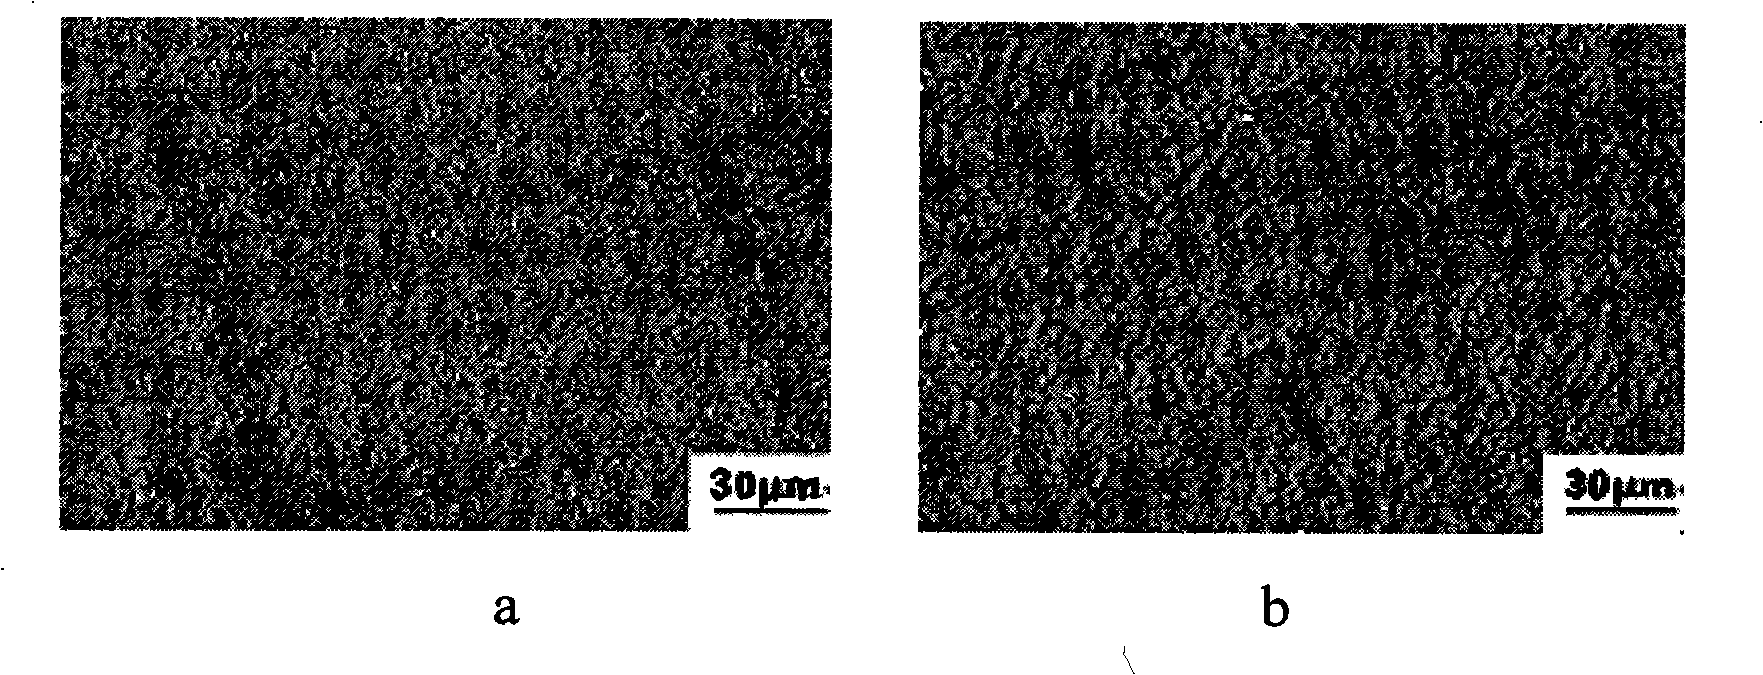 Method for preparing Cu/Cr2O3 composite material from Ce-CuCr prealloy powder